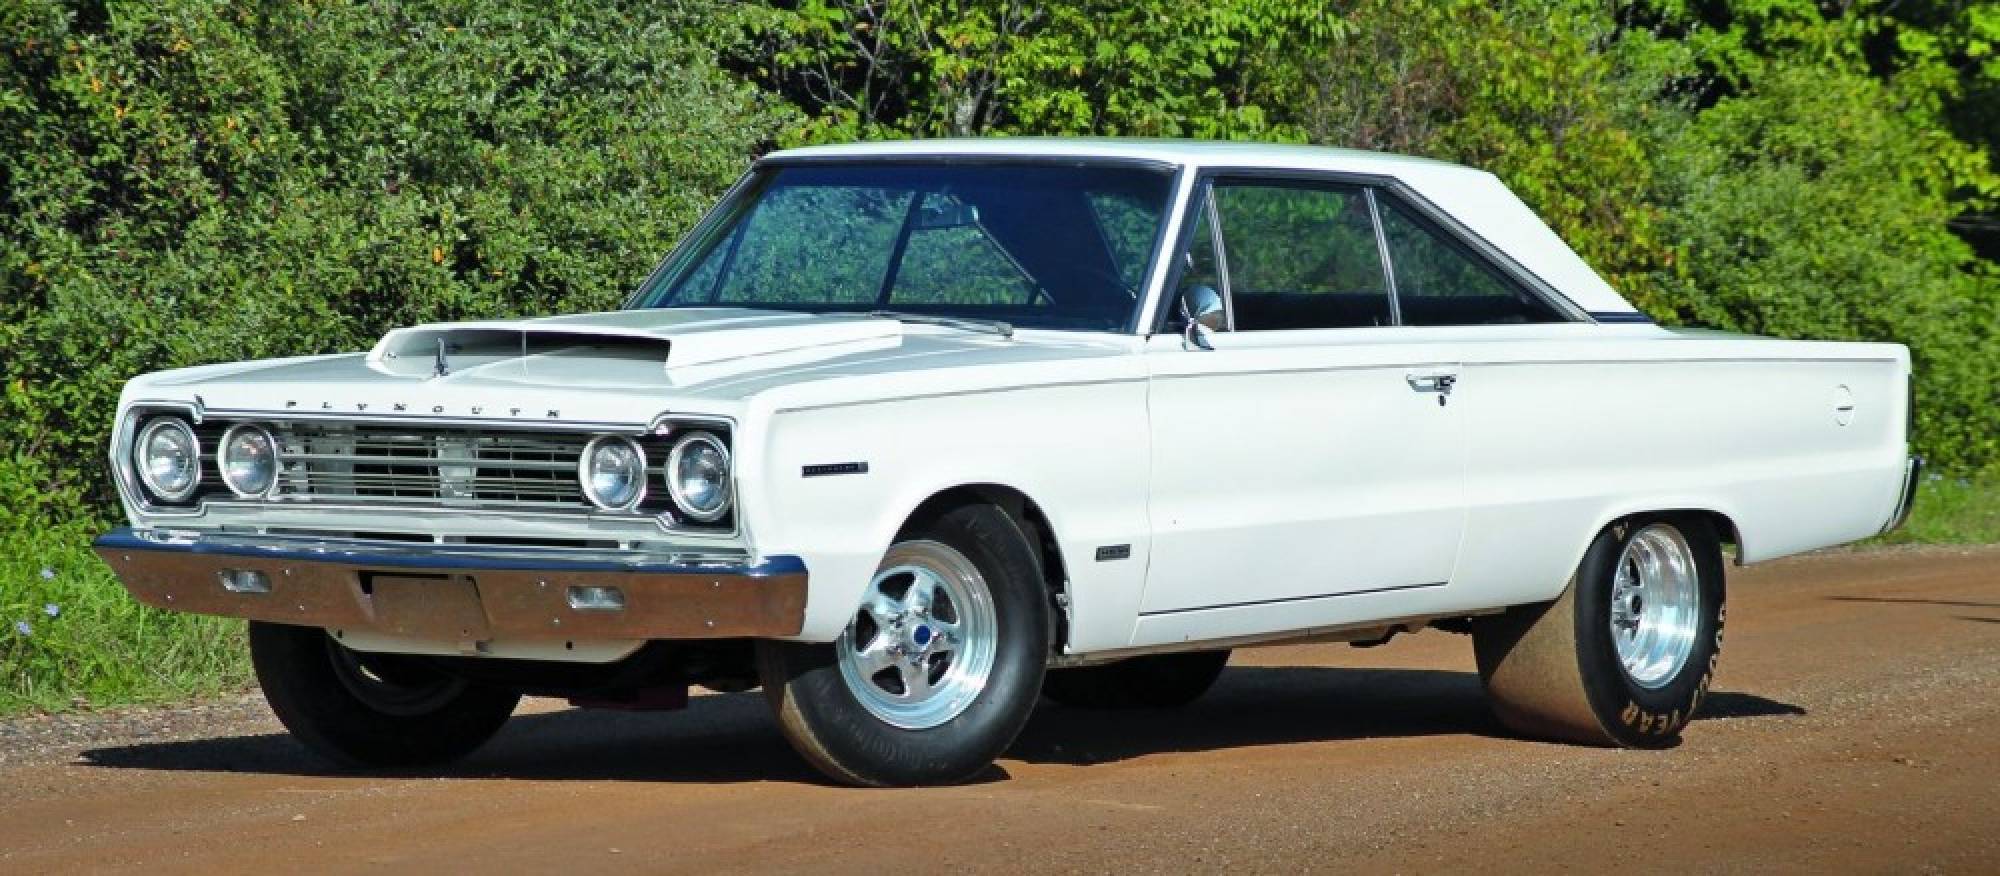 1967 Plymouth Belvedere #5